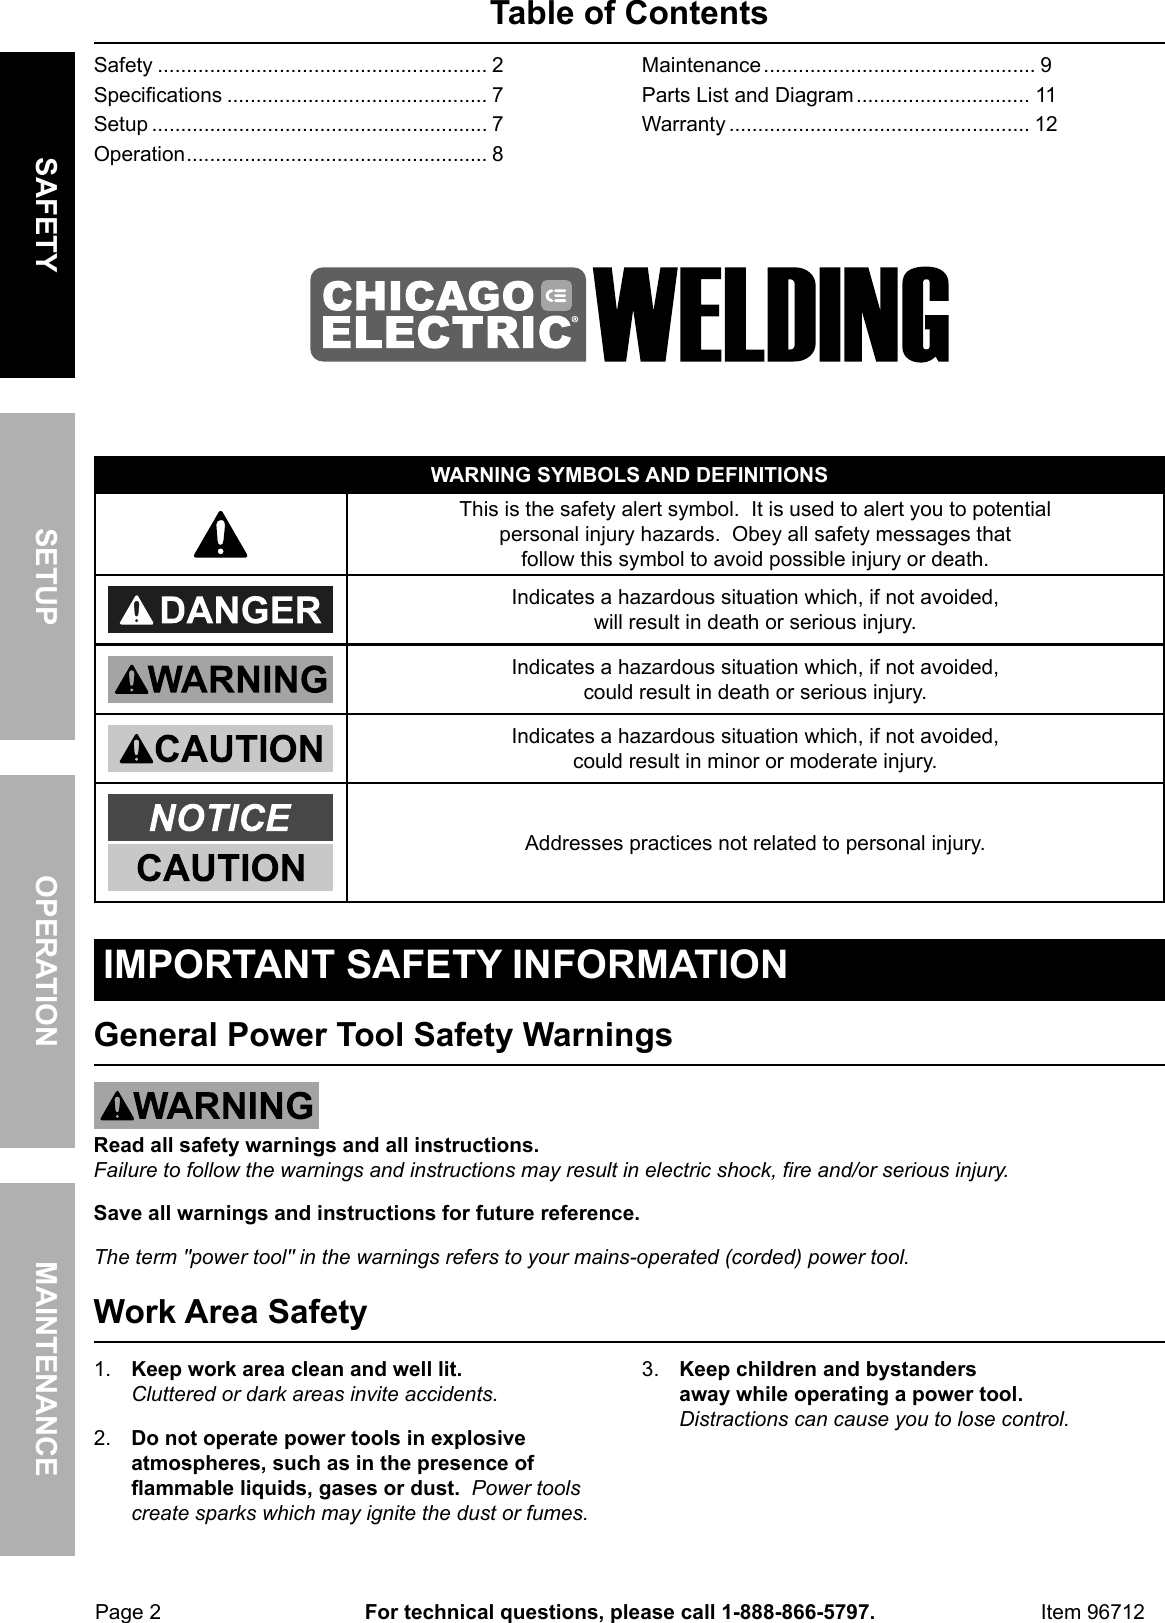 Page 2 of 12 - Harbor-Freight Harbor-Freight-1300-Watt-Plastic-Welding-Kit-With-Air-Motor-And-Temperature-Adjustment-Product-Manual-  Harbor-freight-1300-watt-plastic-welding-kit-with-air-motor-and-temperature-adjustment-product-manual